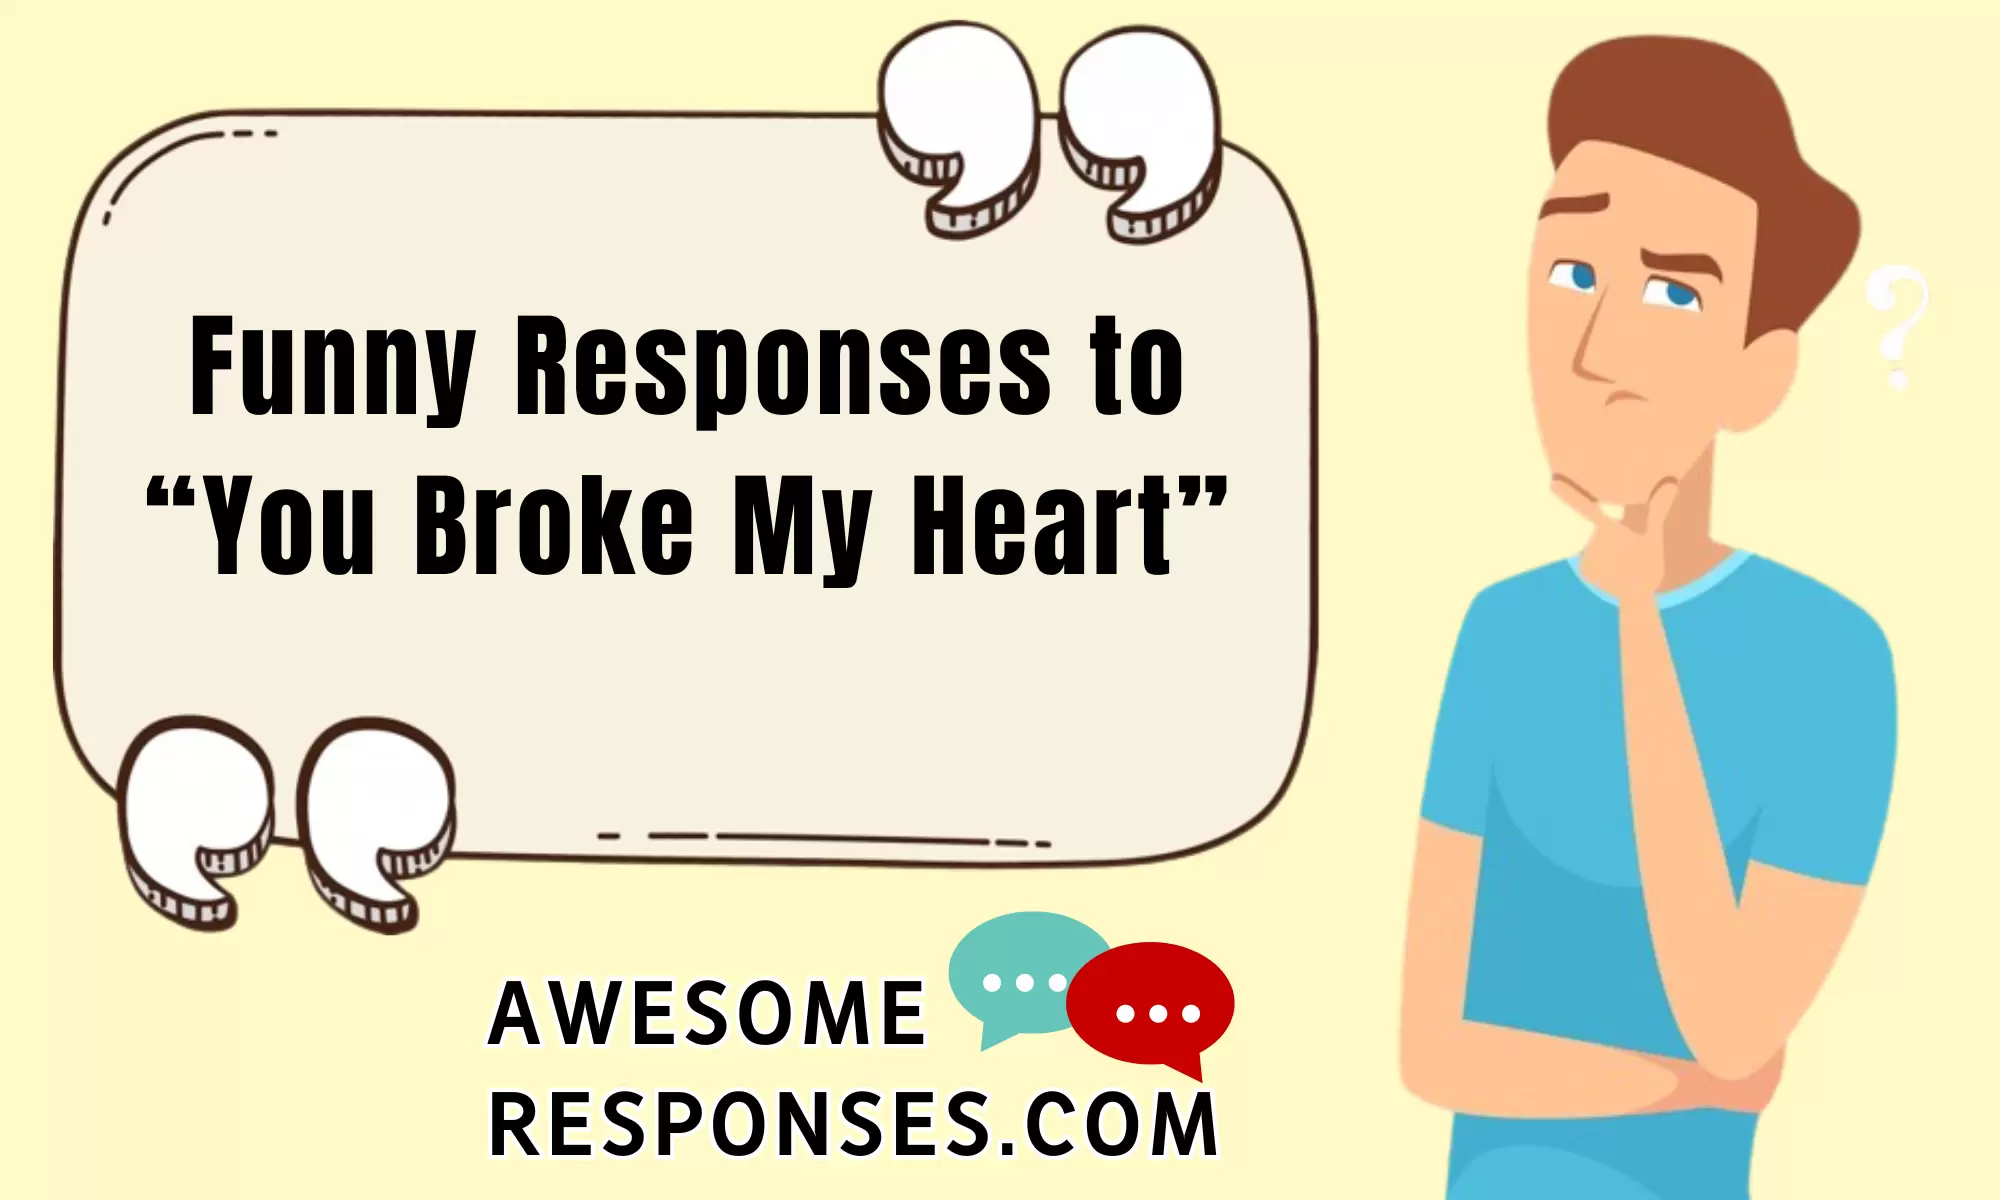 Funny Responses to “You Broke My Heart”